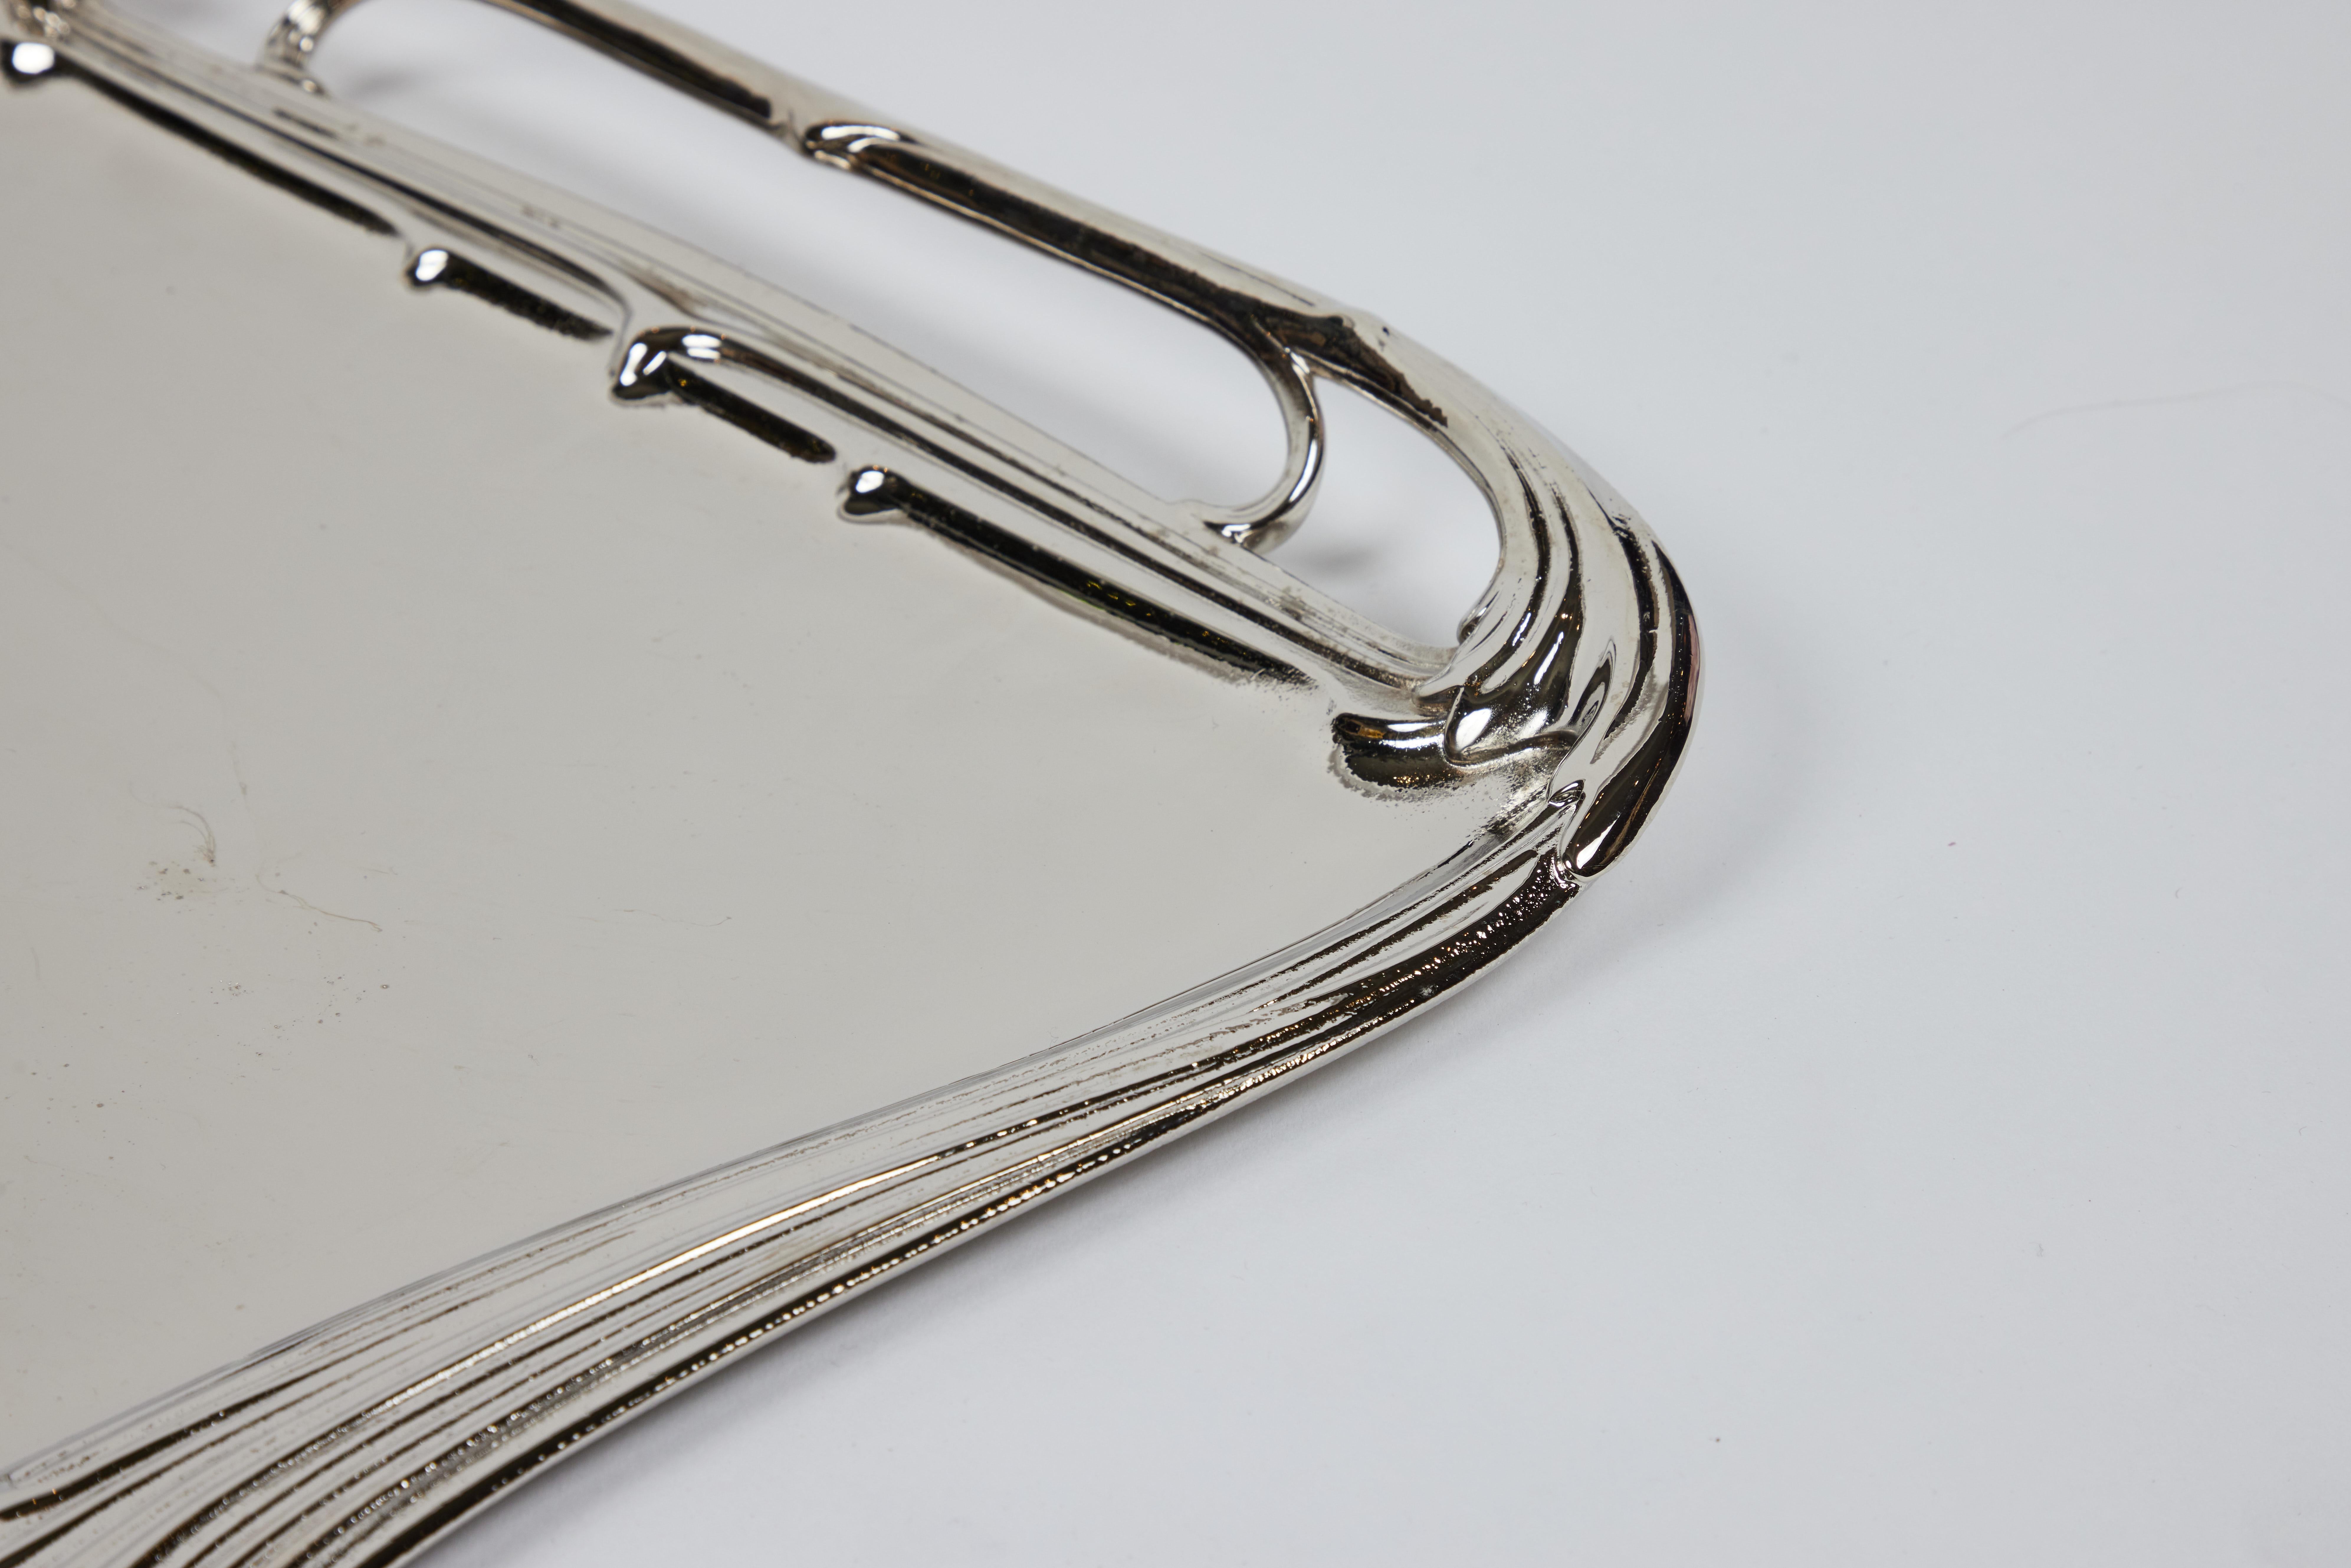 Our oversized vintage WMF serving tray is in an Art Nouveau style design. Simple yet so chic with beautiful curves and waves. It is heavyweight stainless and has been newly polished with a new nickel finish. A gorgeous statement wherever it is